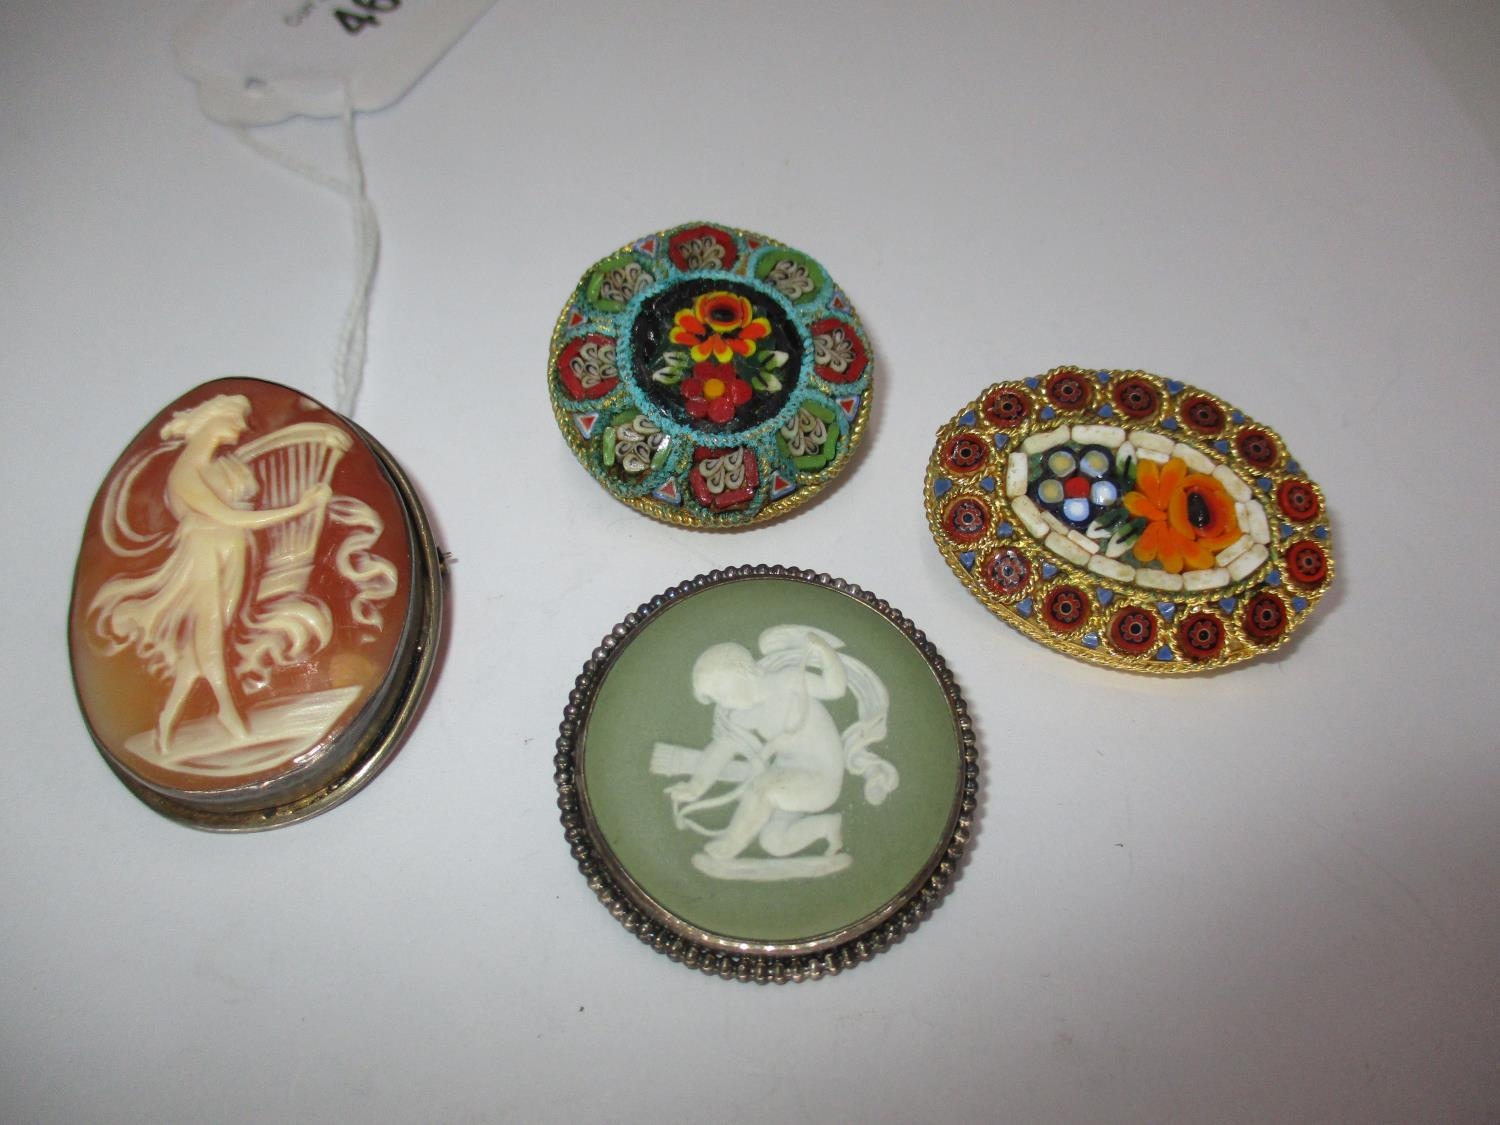 Two Micro Mosaic Brooches, Wedgwood Brooch and a Cameo Brooch